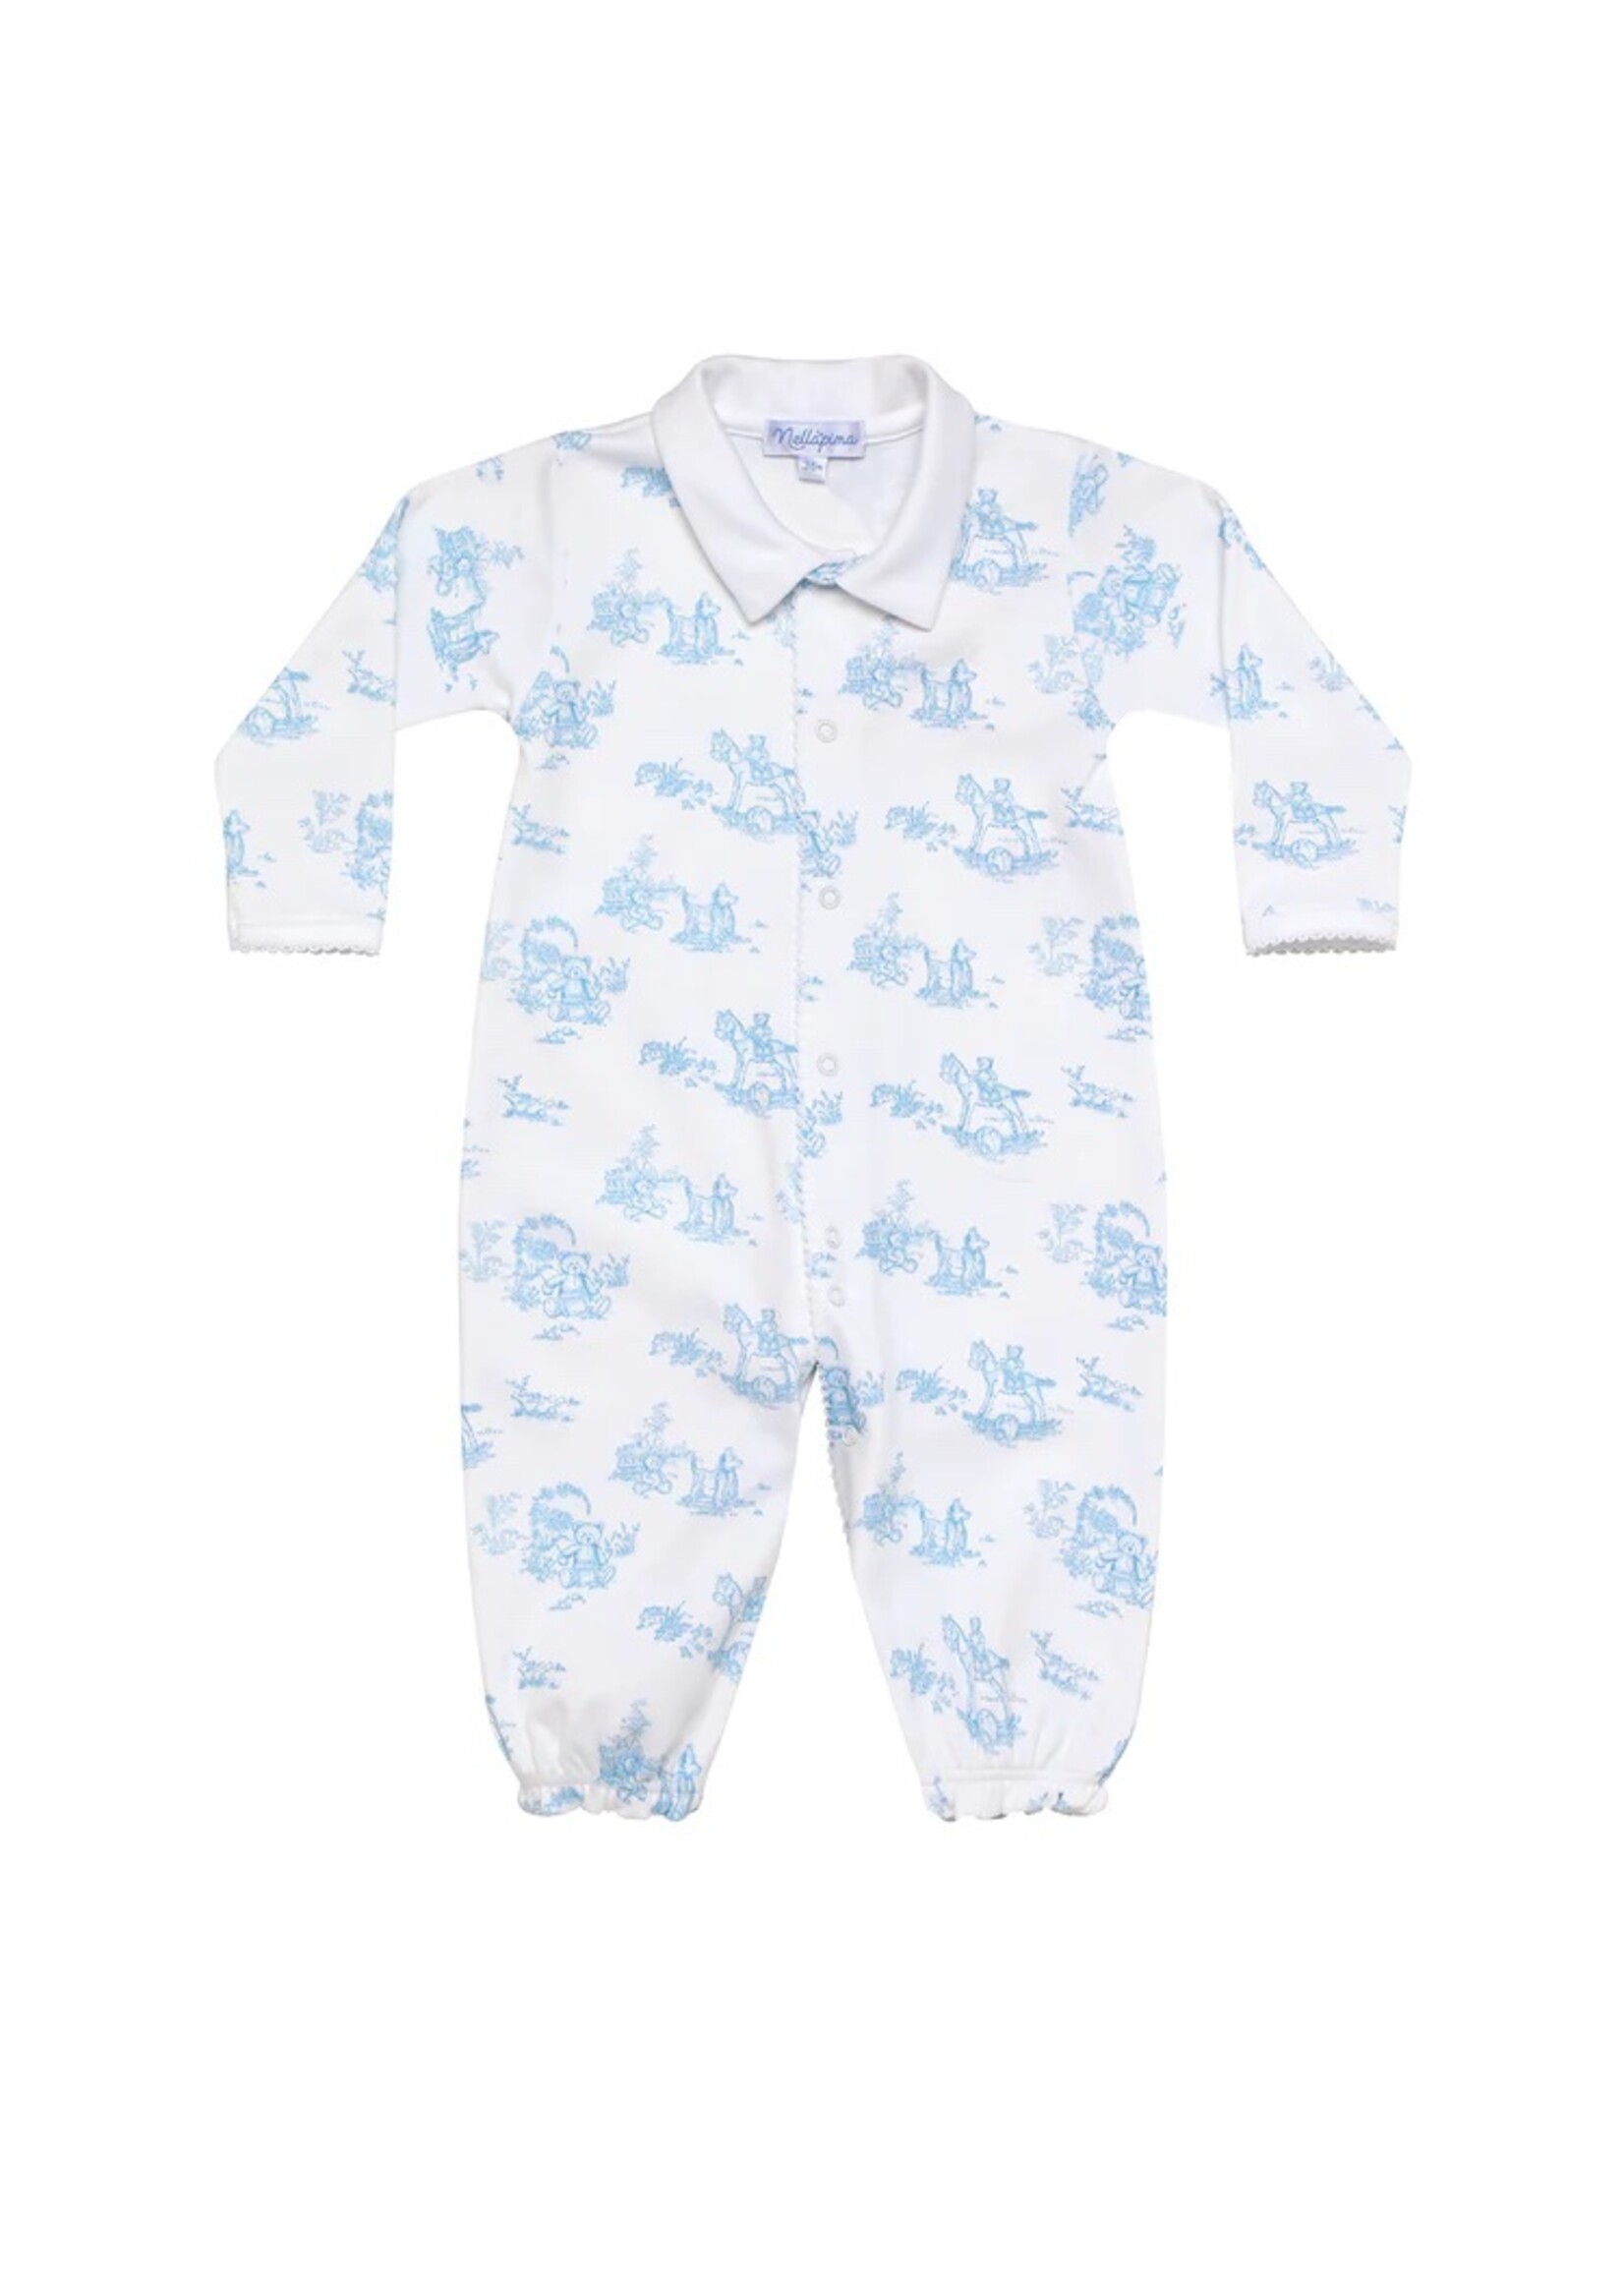 Nellapima Blue Toile Baby Converter Gown